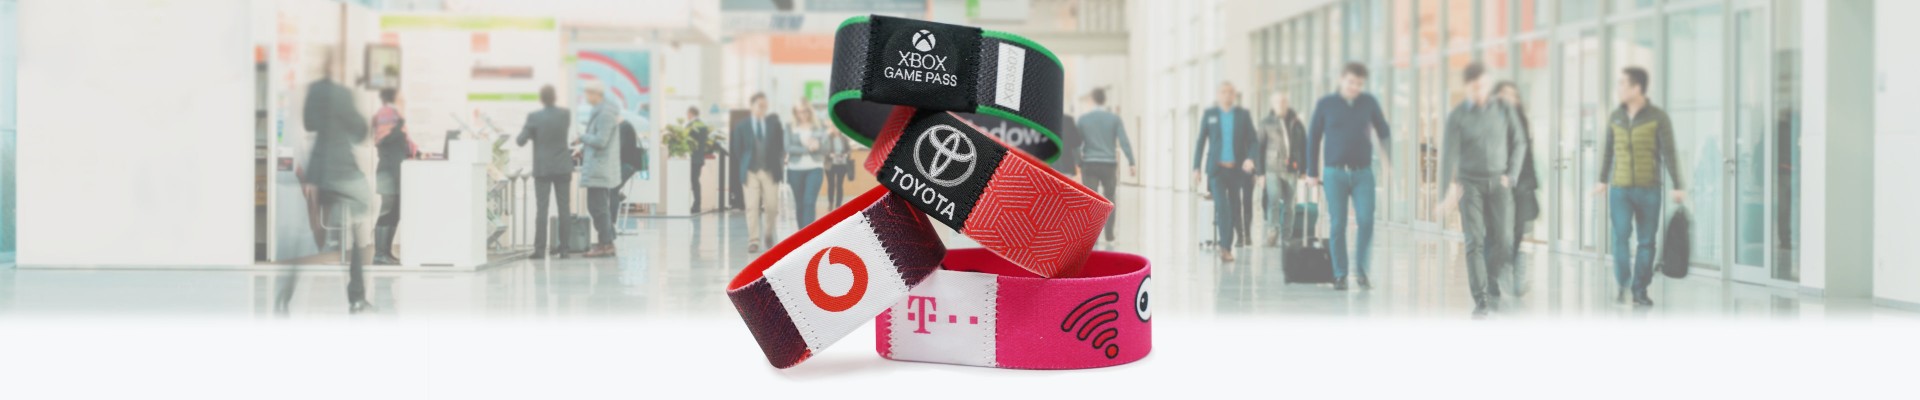 NFC wristbands as intelligent giveaway with added value for trade fairs